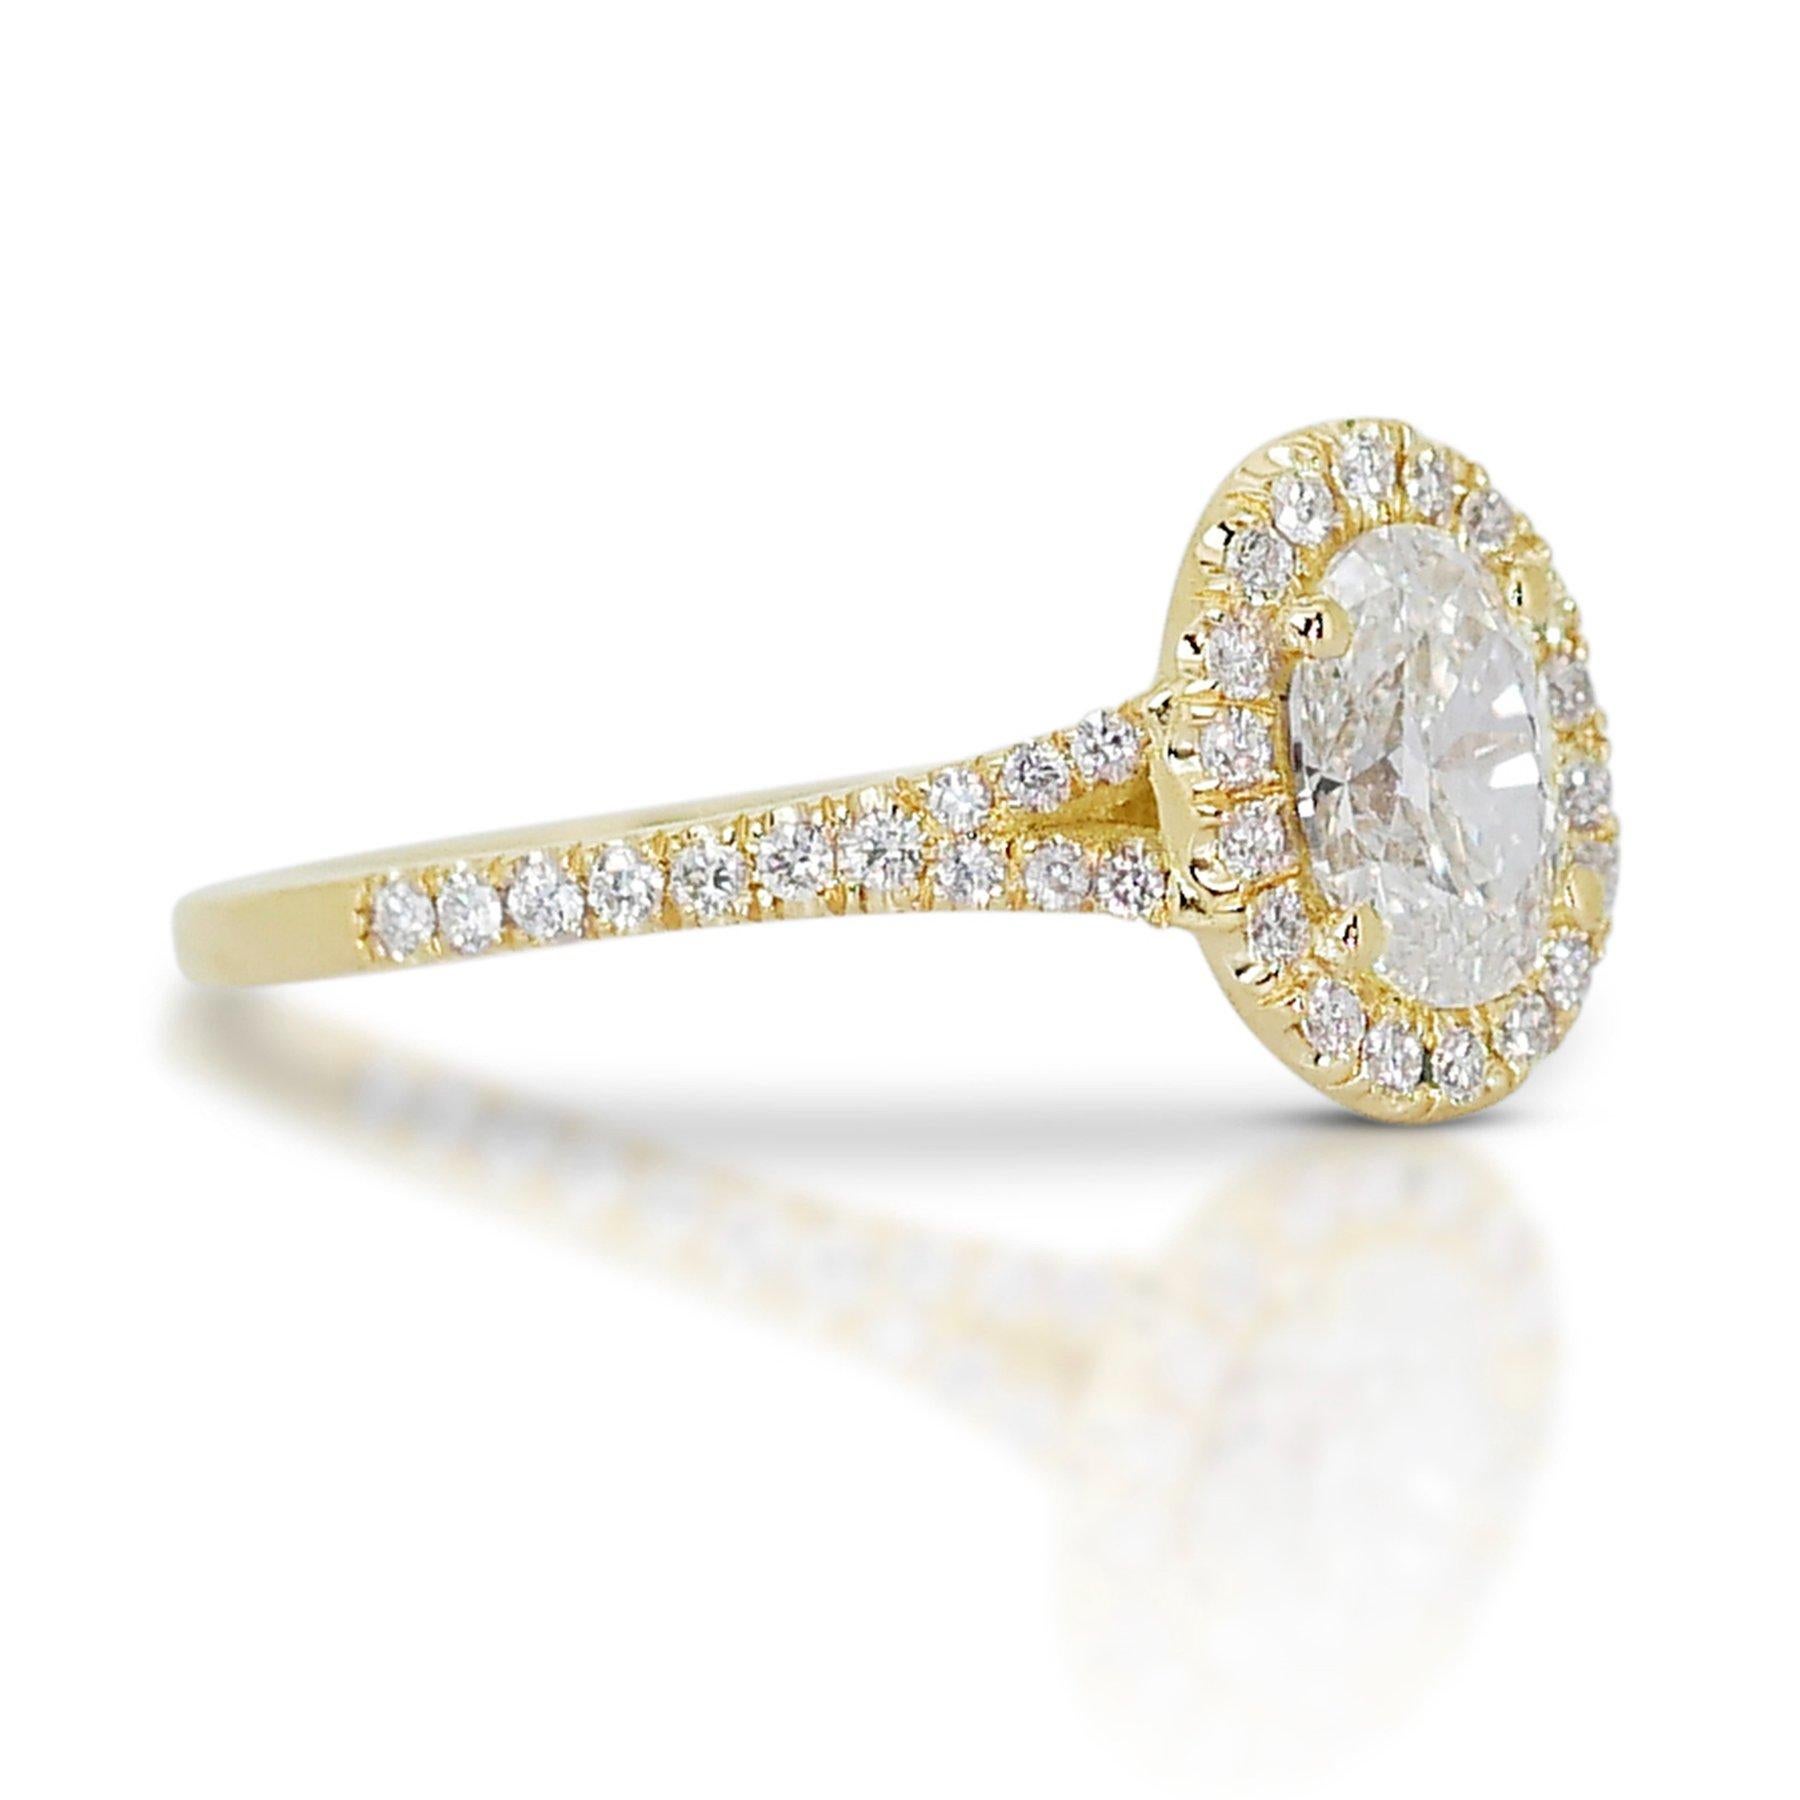 Stunning 18K Yellow Gold Natural Diamond Halo Ring w/1.04ct - GIA Certified

This stunning ring showcases a captivating design, featuring a mesmerizing 1.01 carat center diamond in a dazzling halo setting. Forty-four sparkling round diamonds,